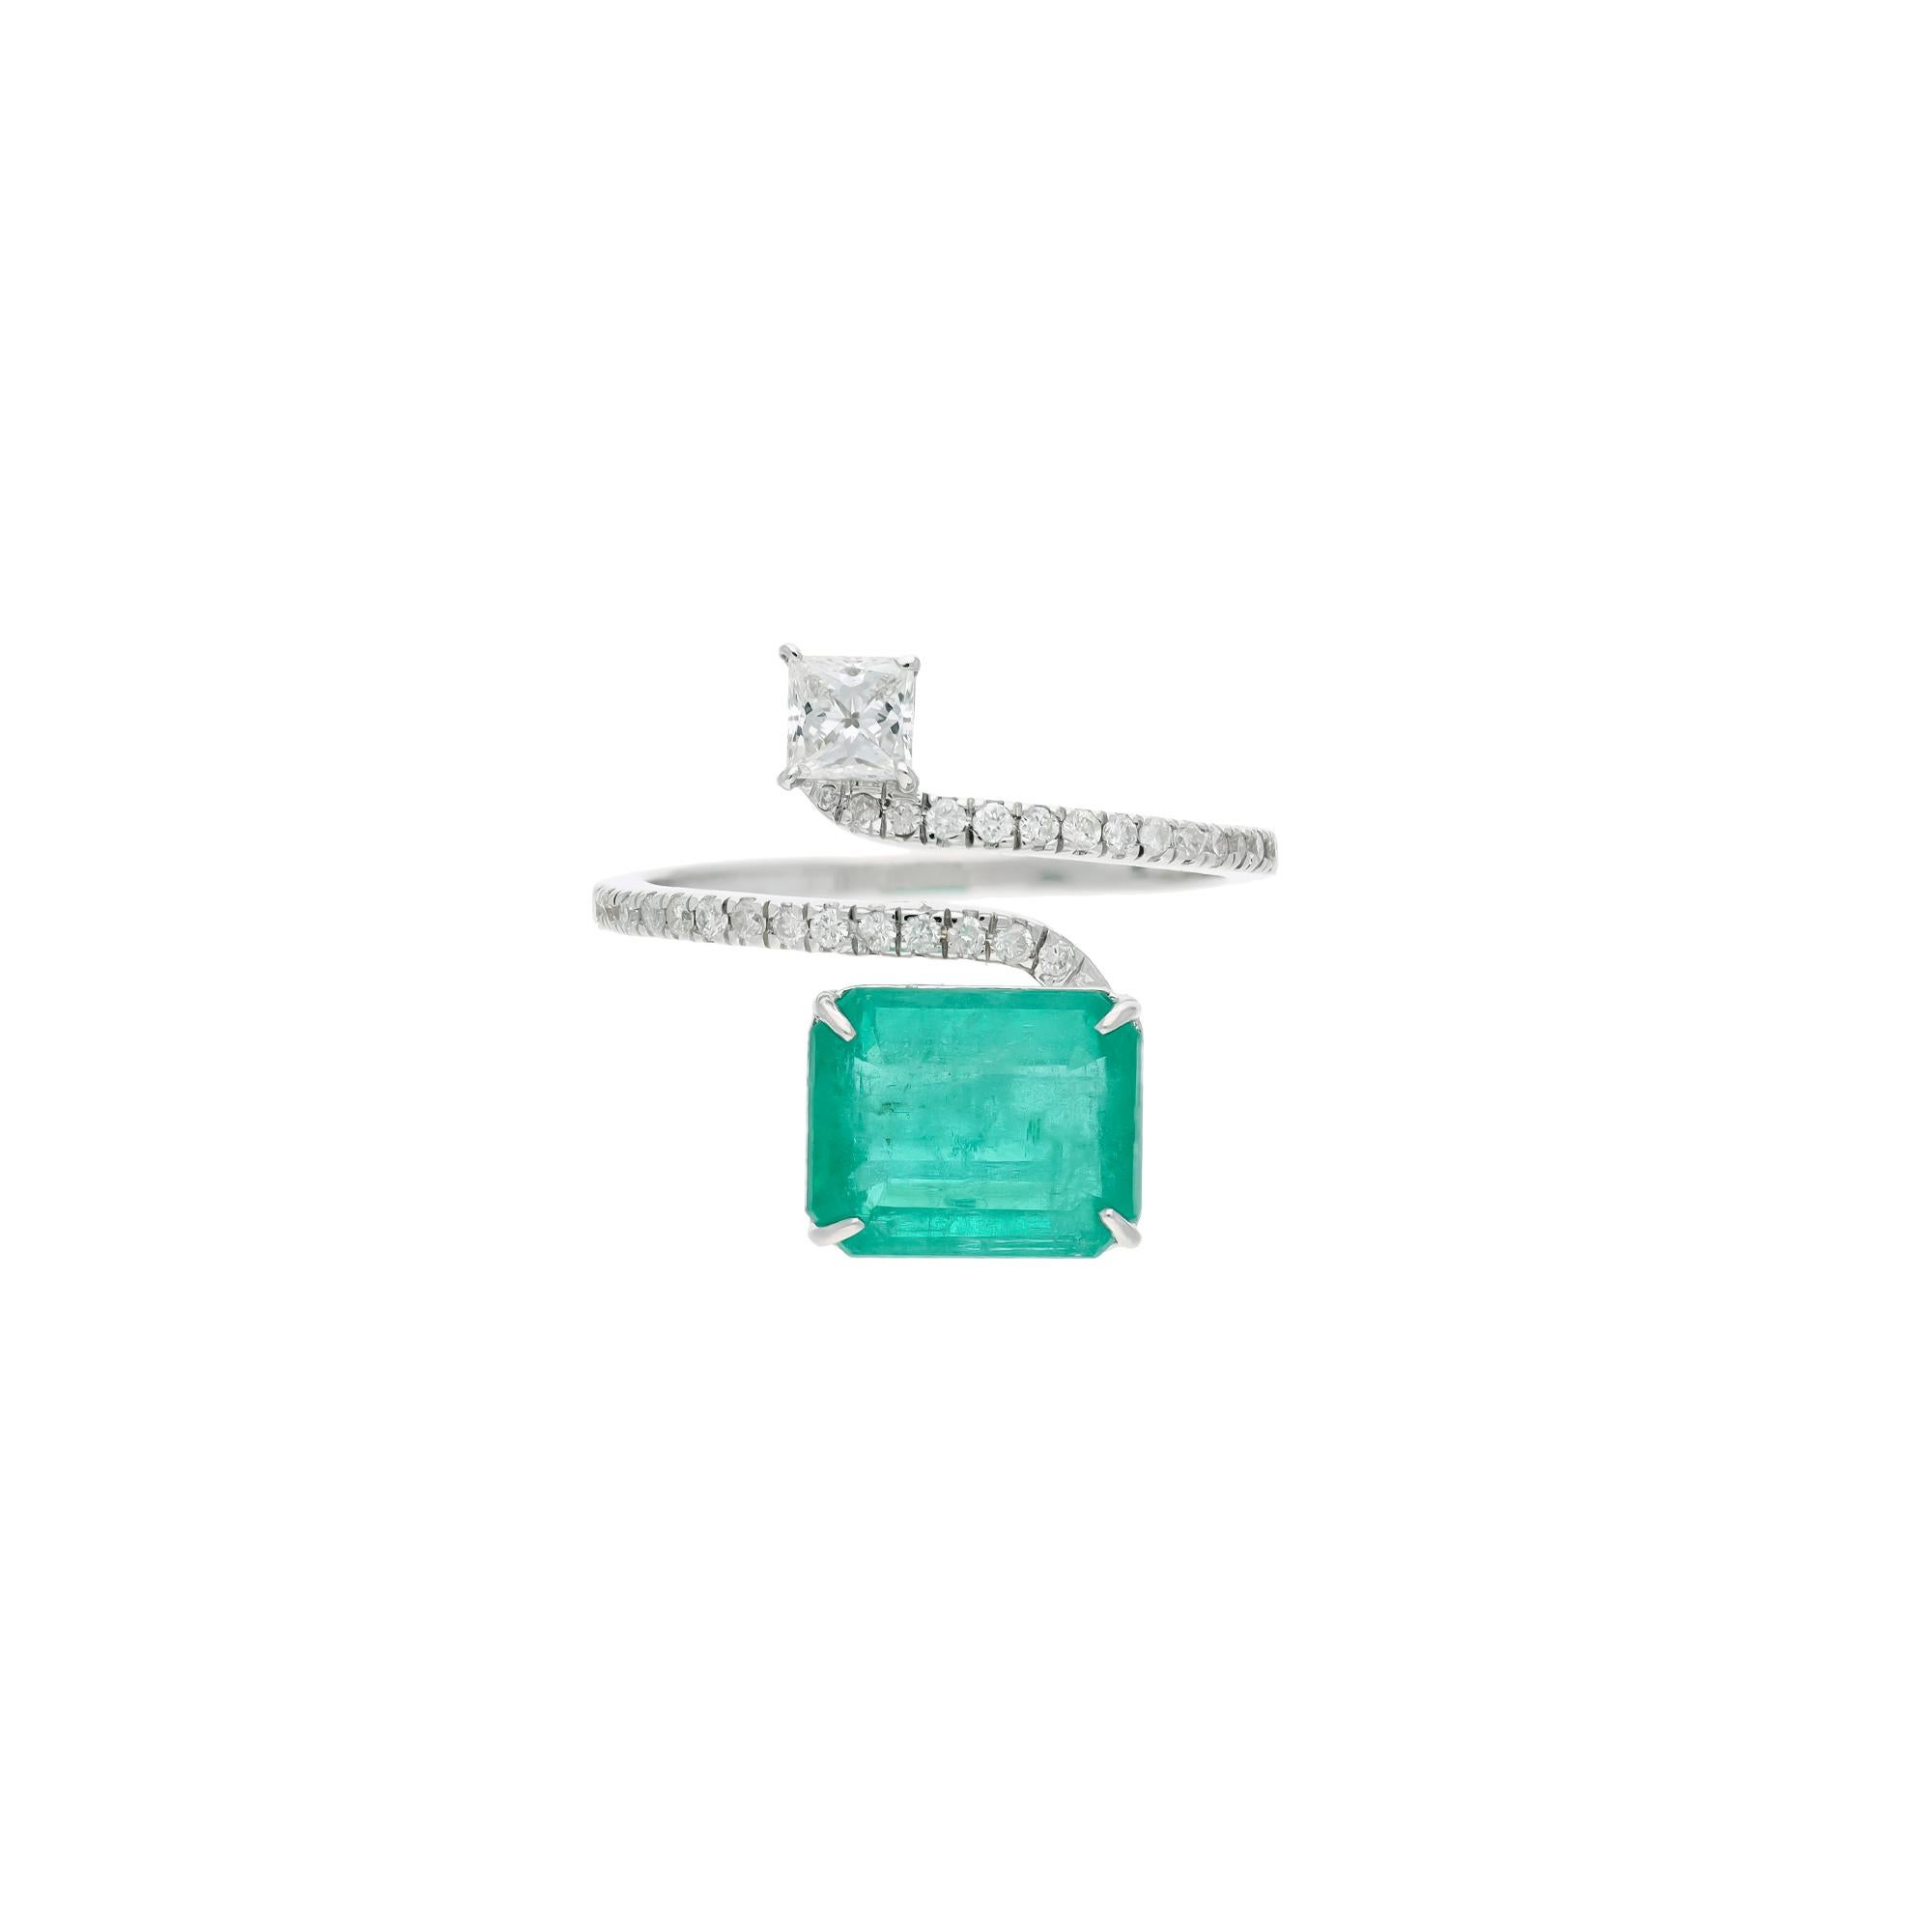 This is a natural Zambian Emerald ring with diamonds and 18k gold. The emeralds are very high quality and very good quality diamonds the clarity is vsi and G colour


Emeralds : 3.11 carats
diamonds : 0.49 carats
gold : 3.139 gm

This is a brand new